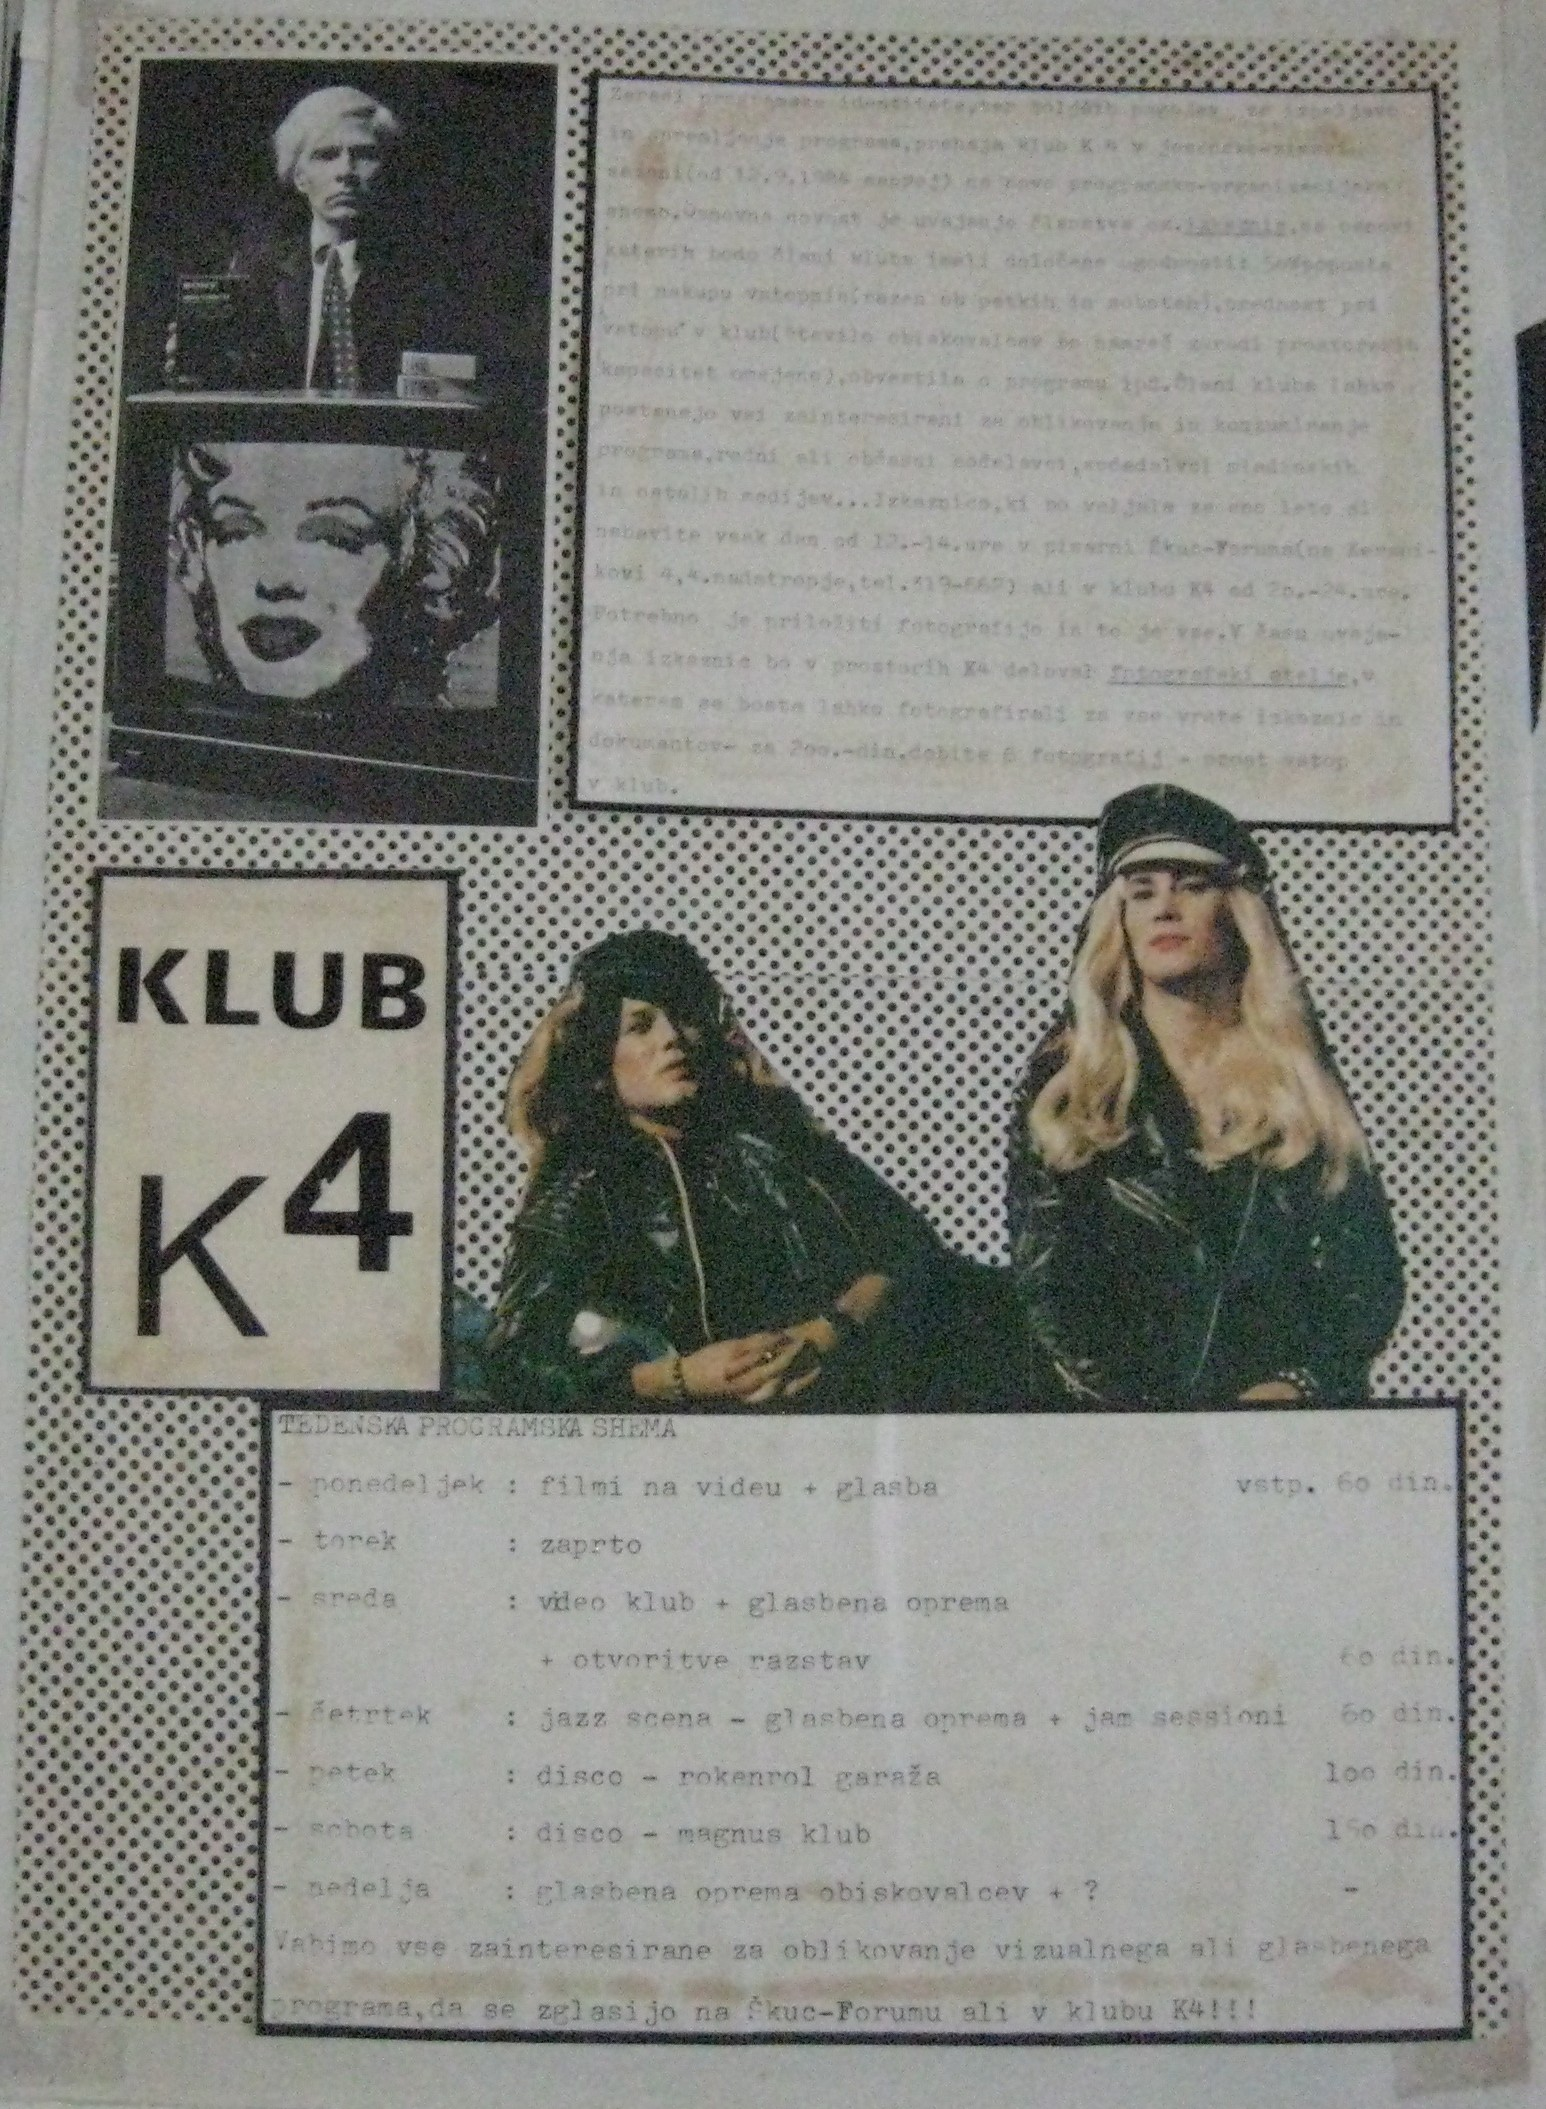 Poster for the Klub K4.